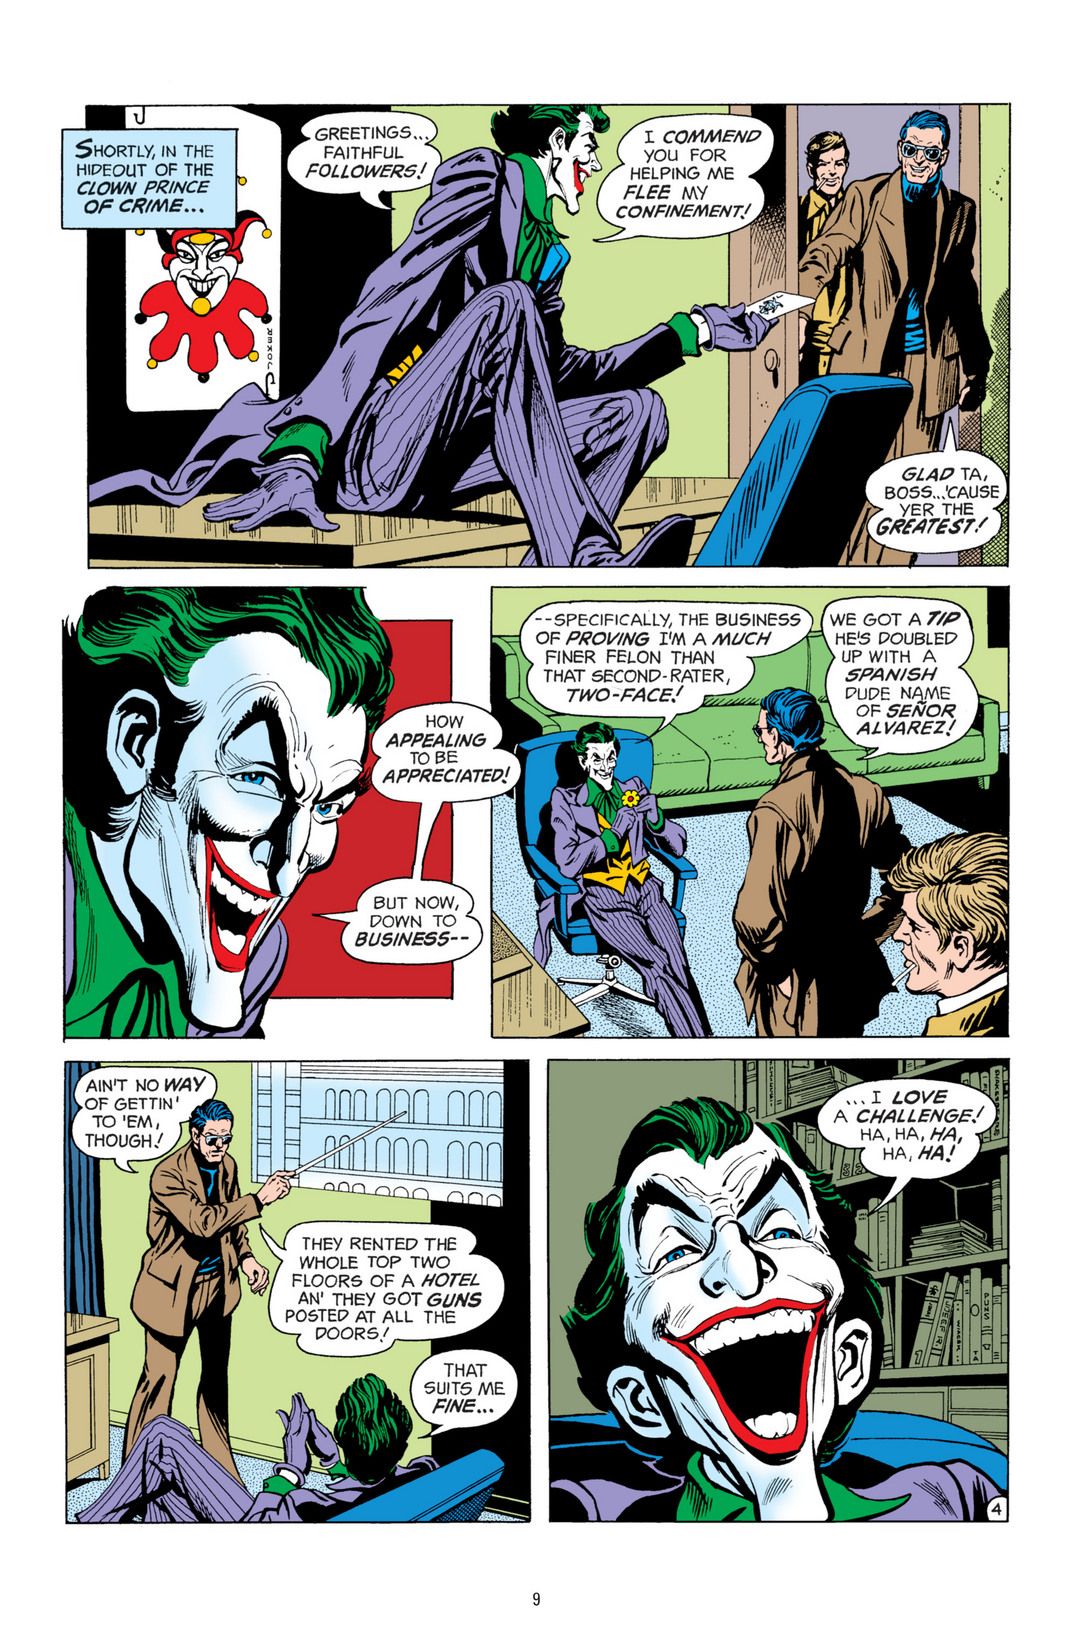 Images of The Joker: The Clown Prince Of Crime | 1073x1650